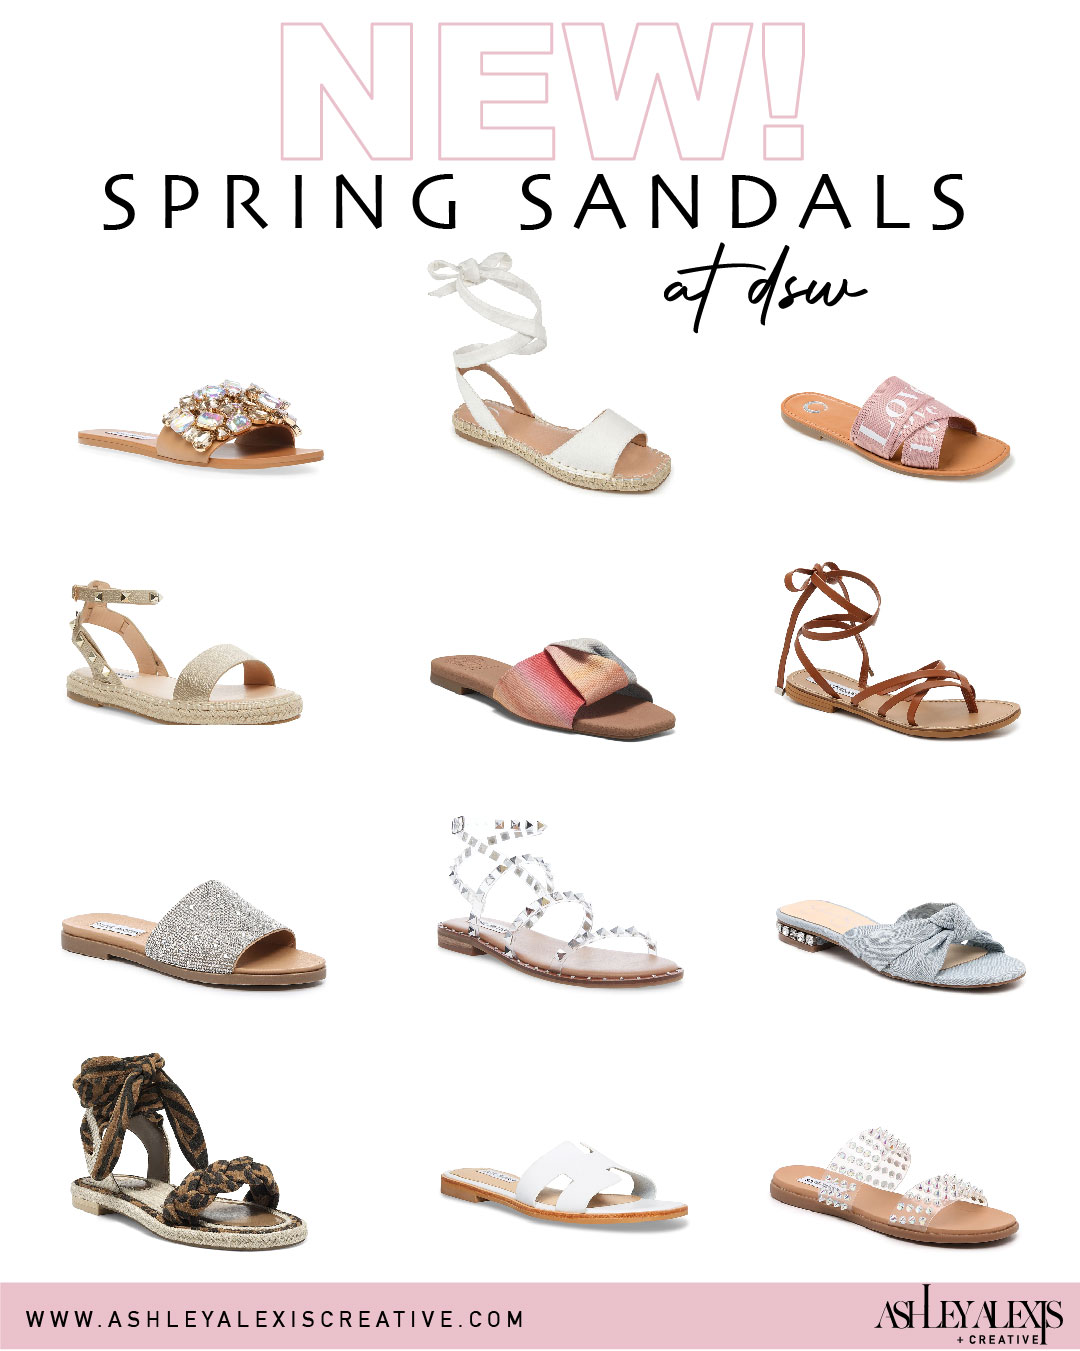 The Ultimate Spring Sandal Guide Is Here! • Ashley Alexis Creative